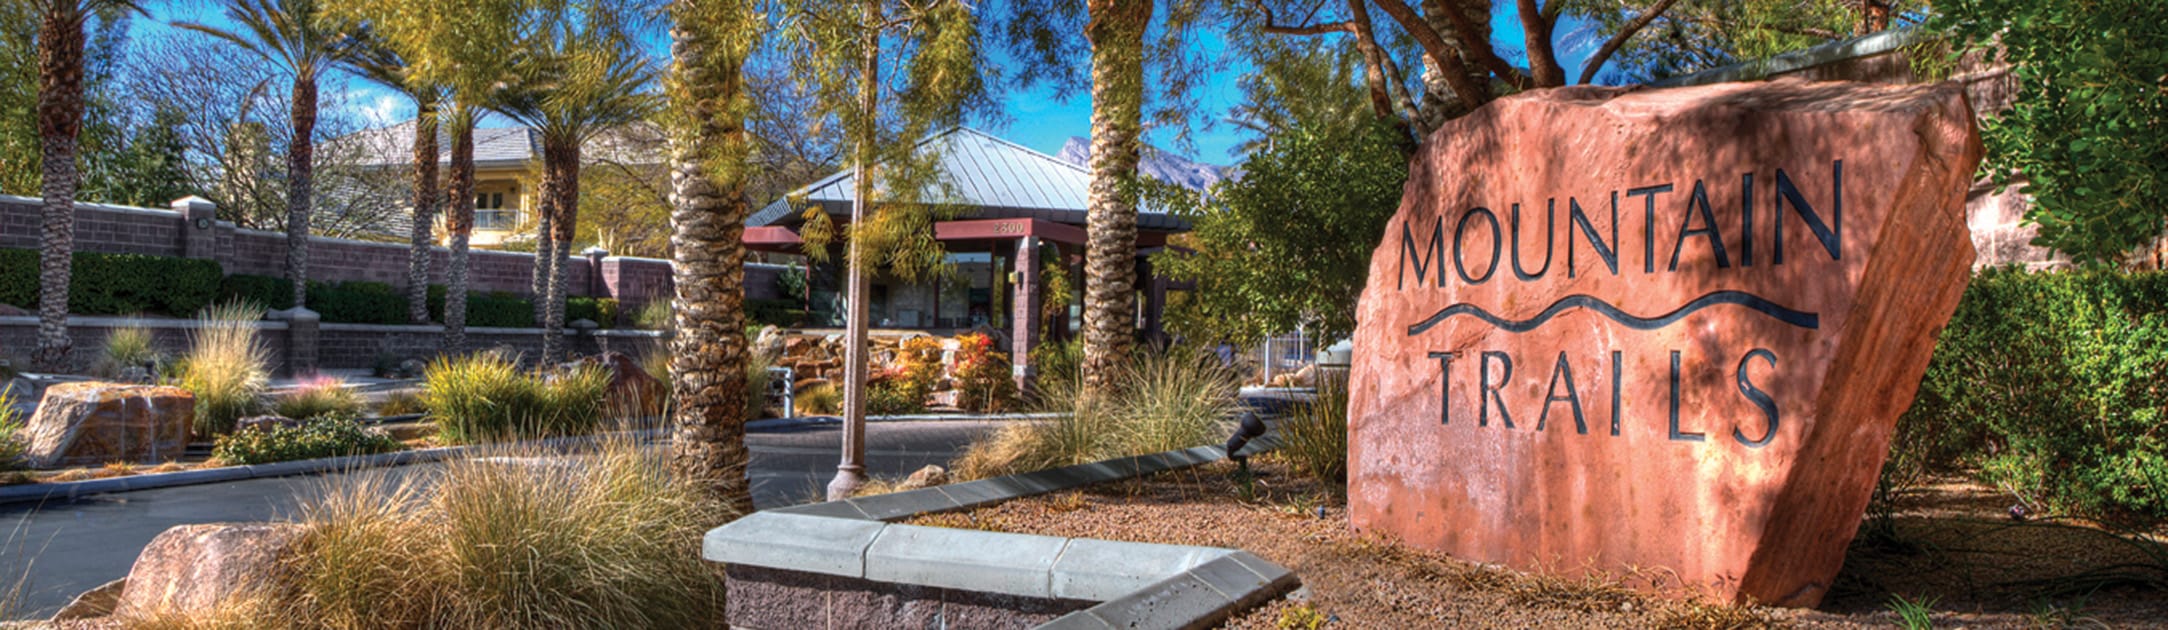 Entrance to Mountain Trails community with red rock stone and name engraved in it with trees and road.